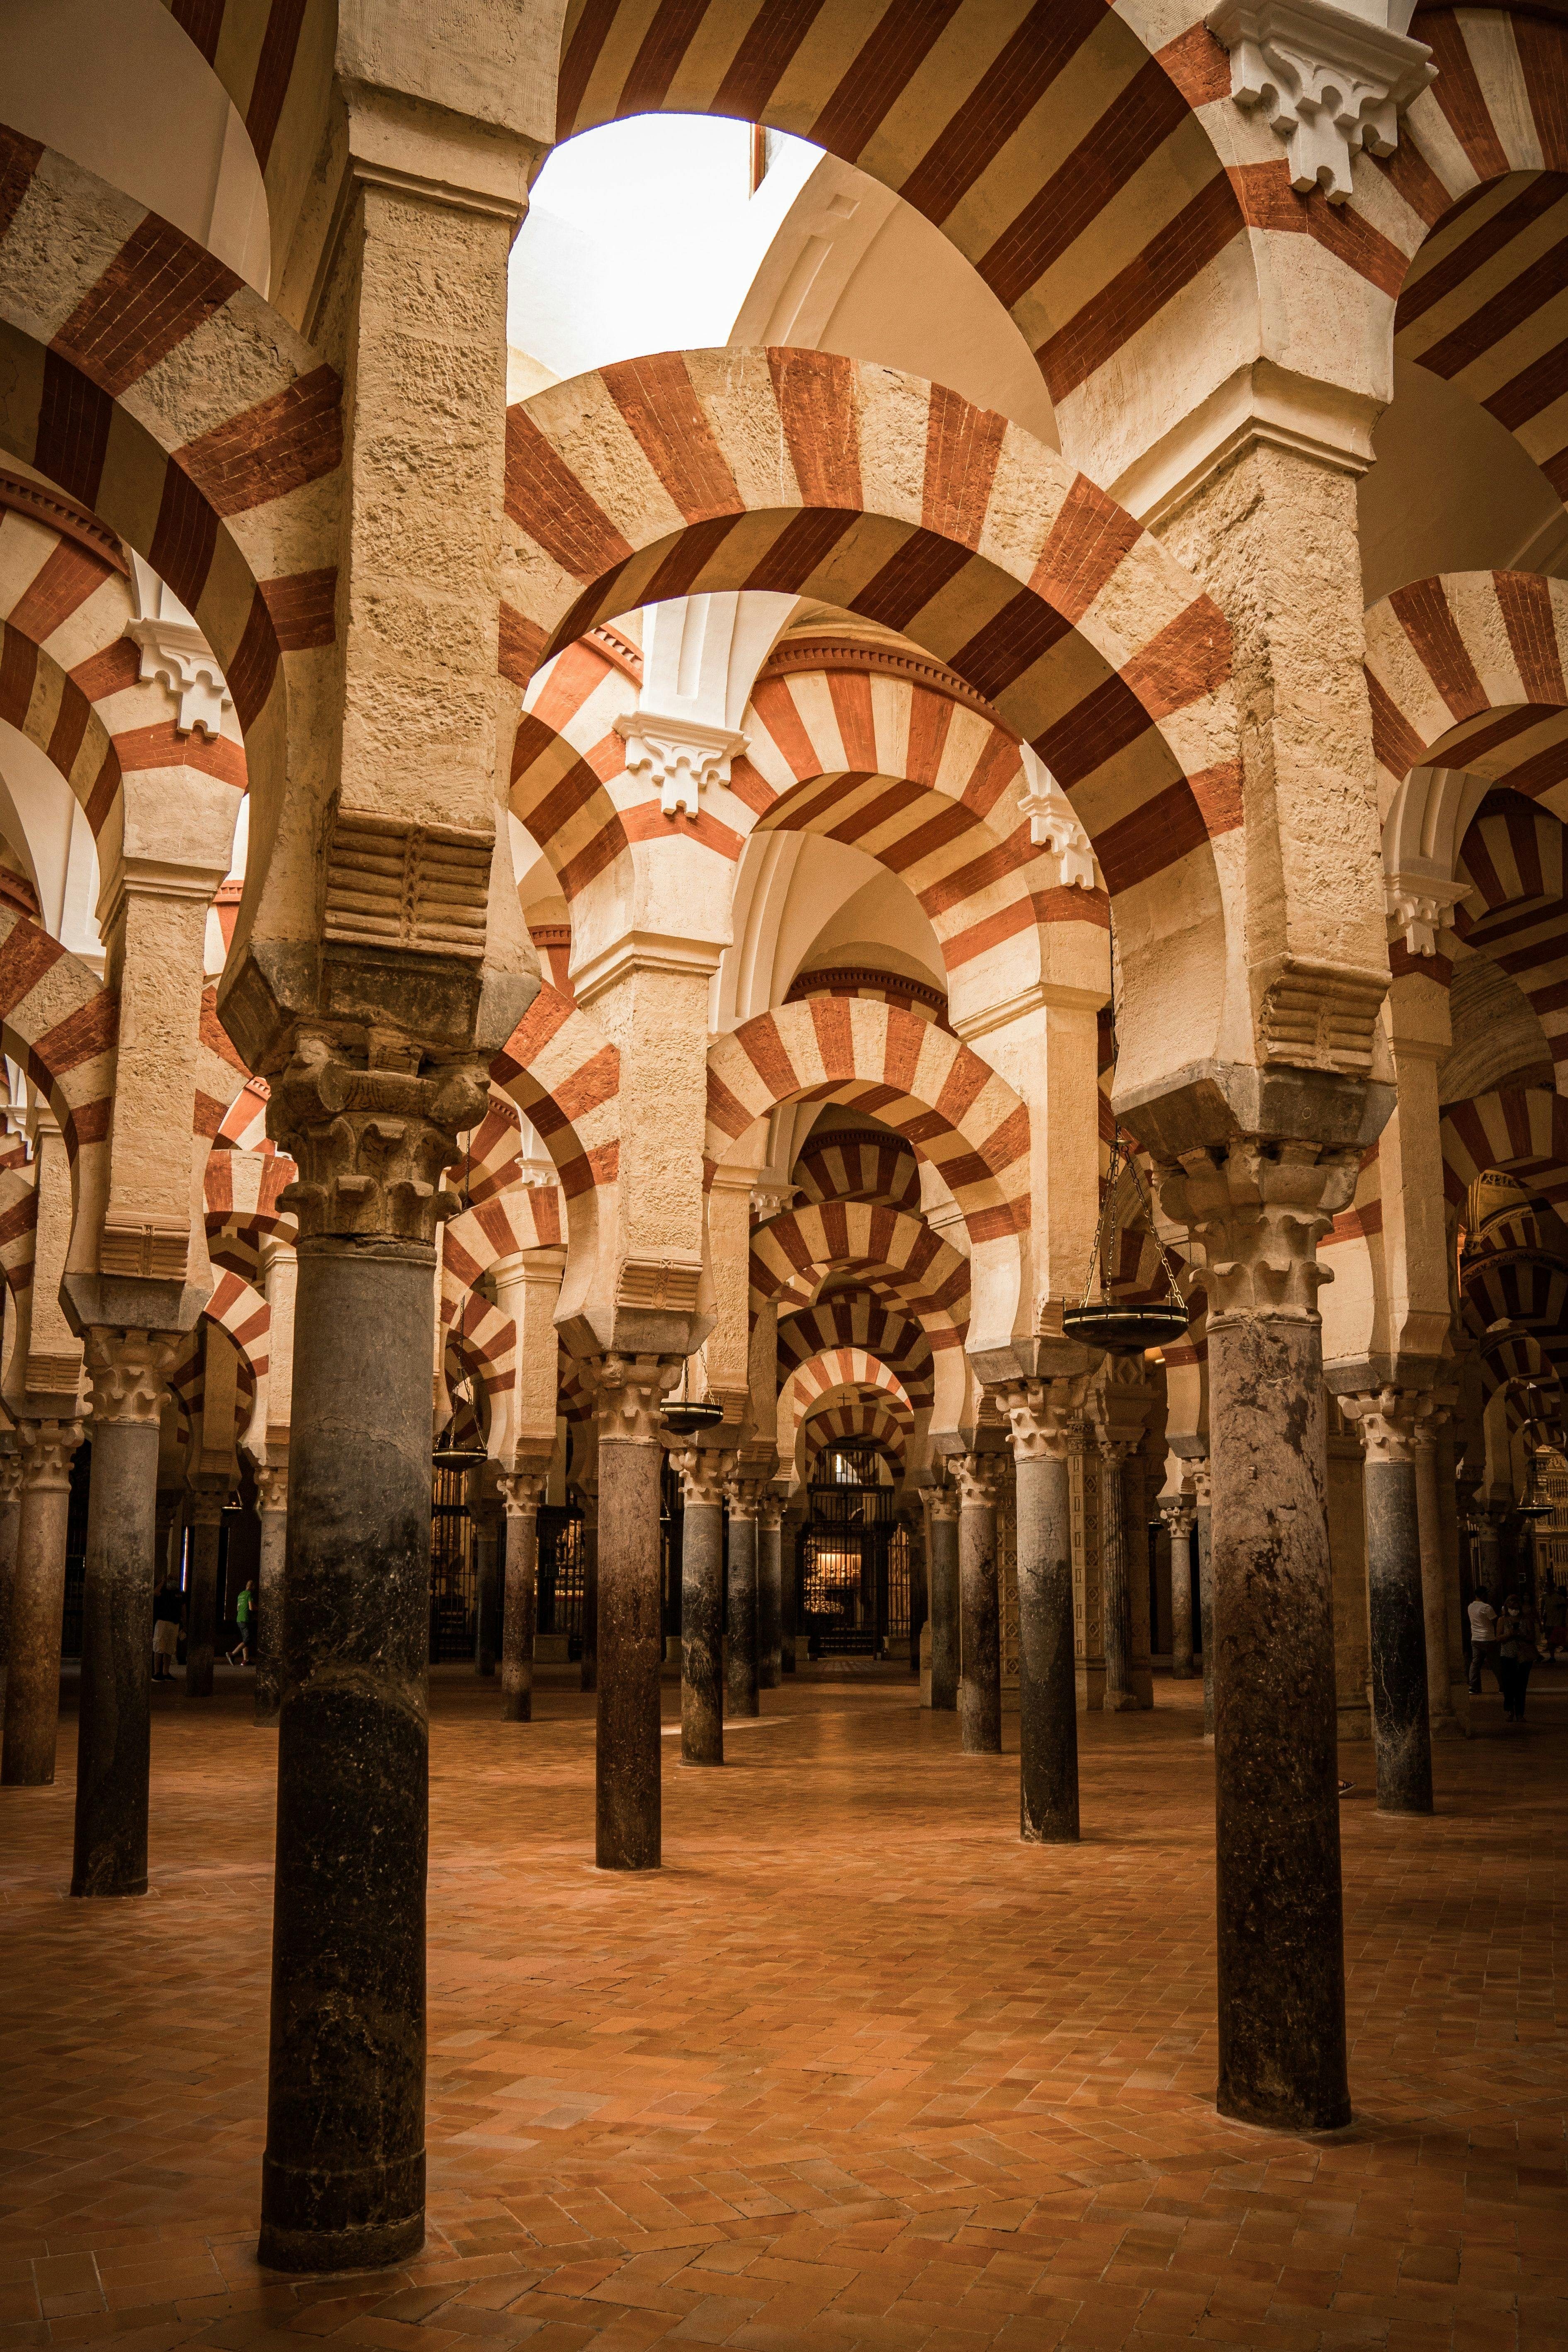 Pillars in Mezquita the Cathedral of Cordoba in Spain.